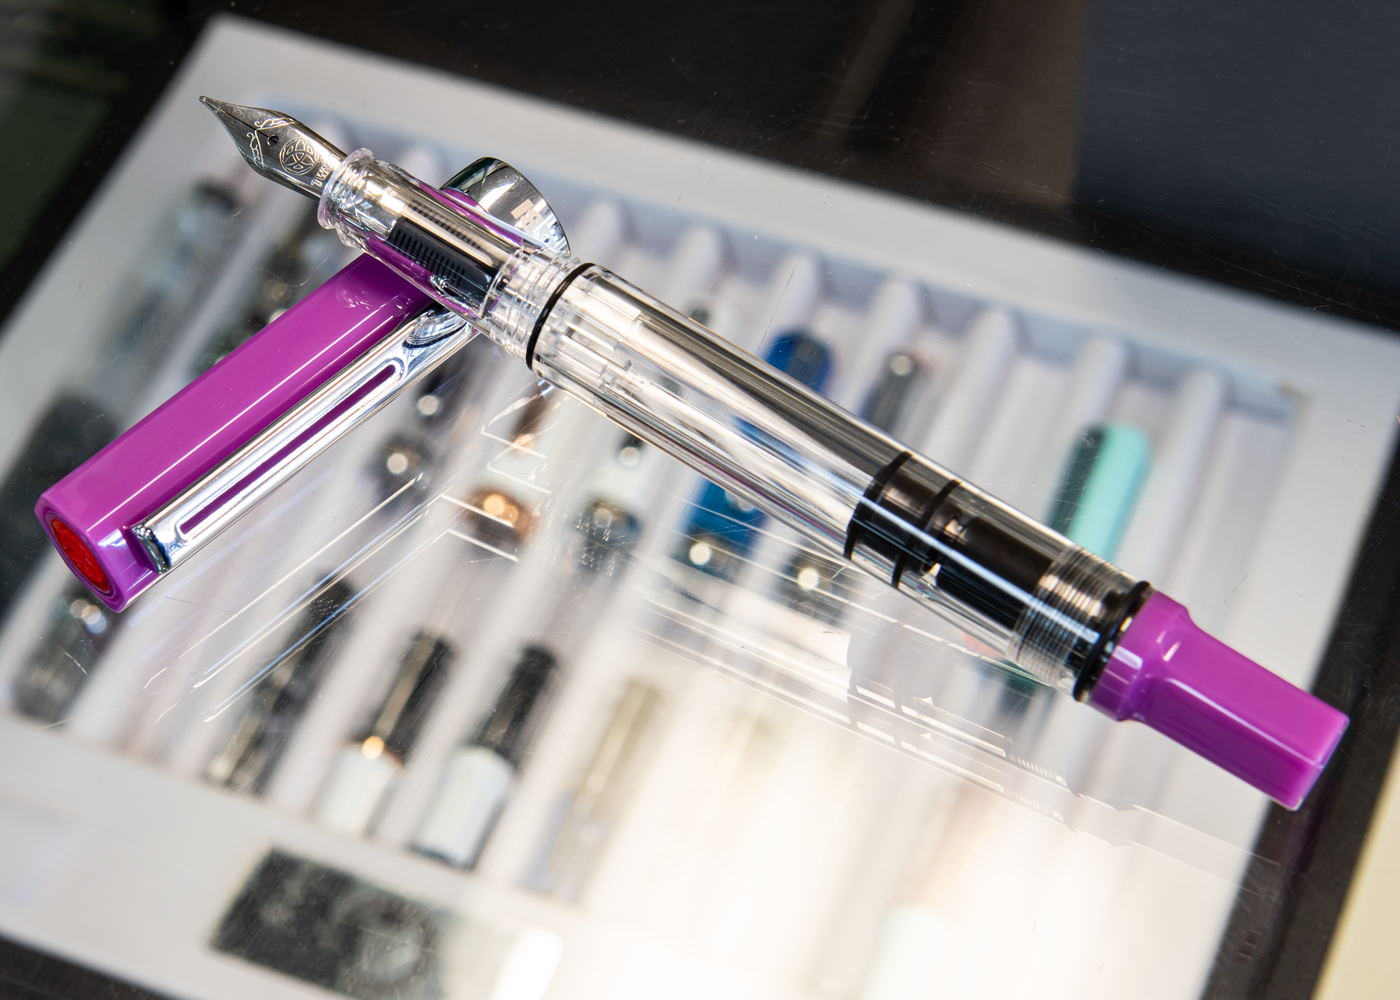 These pens feature a large ink reservoir and piston refill mechanism.  These are well  know to be affordable high quality writing instruments and with their large ink capacity a great pen to start with.  